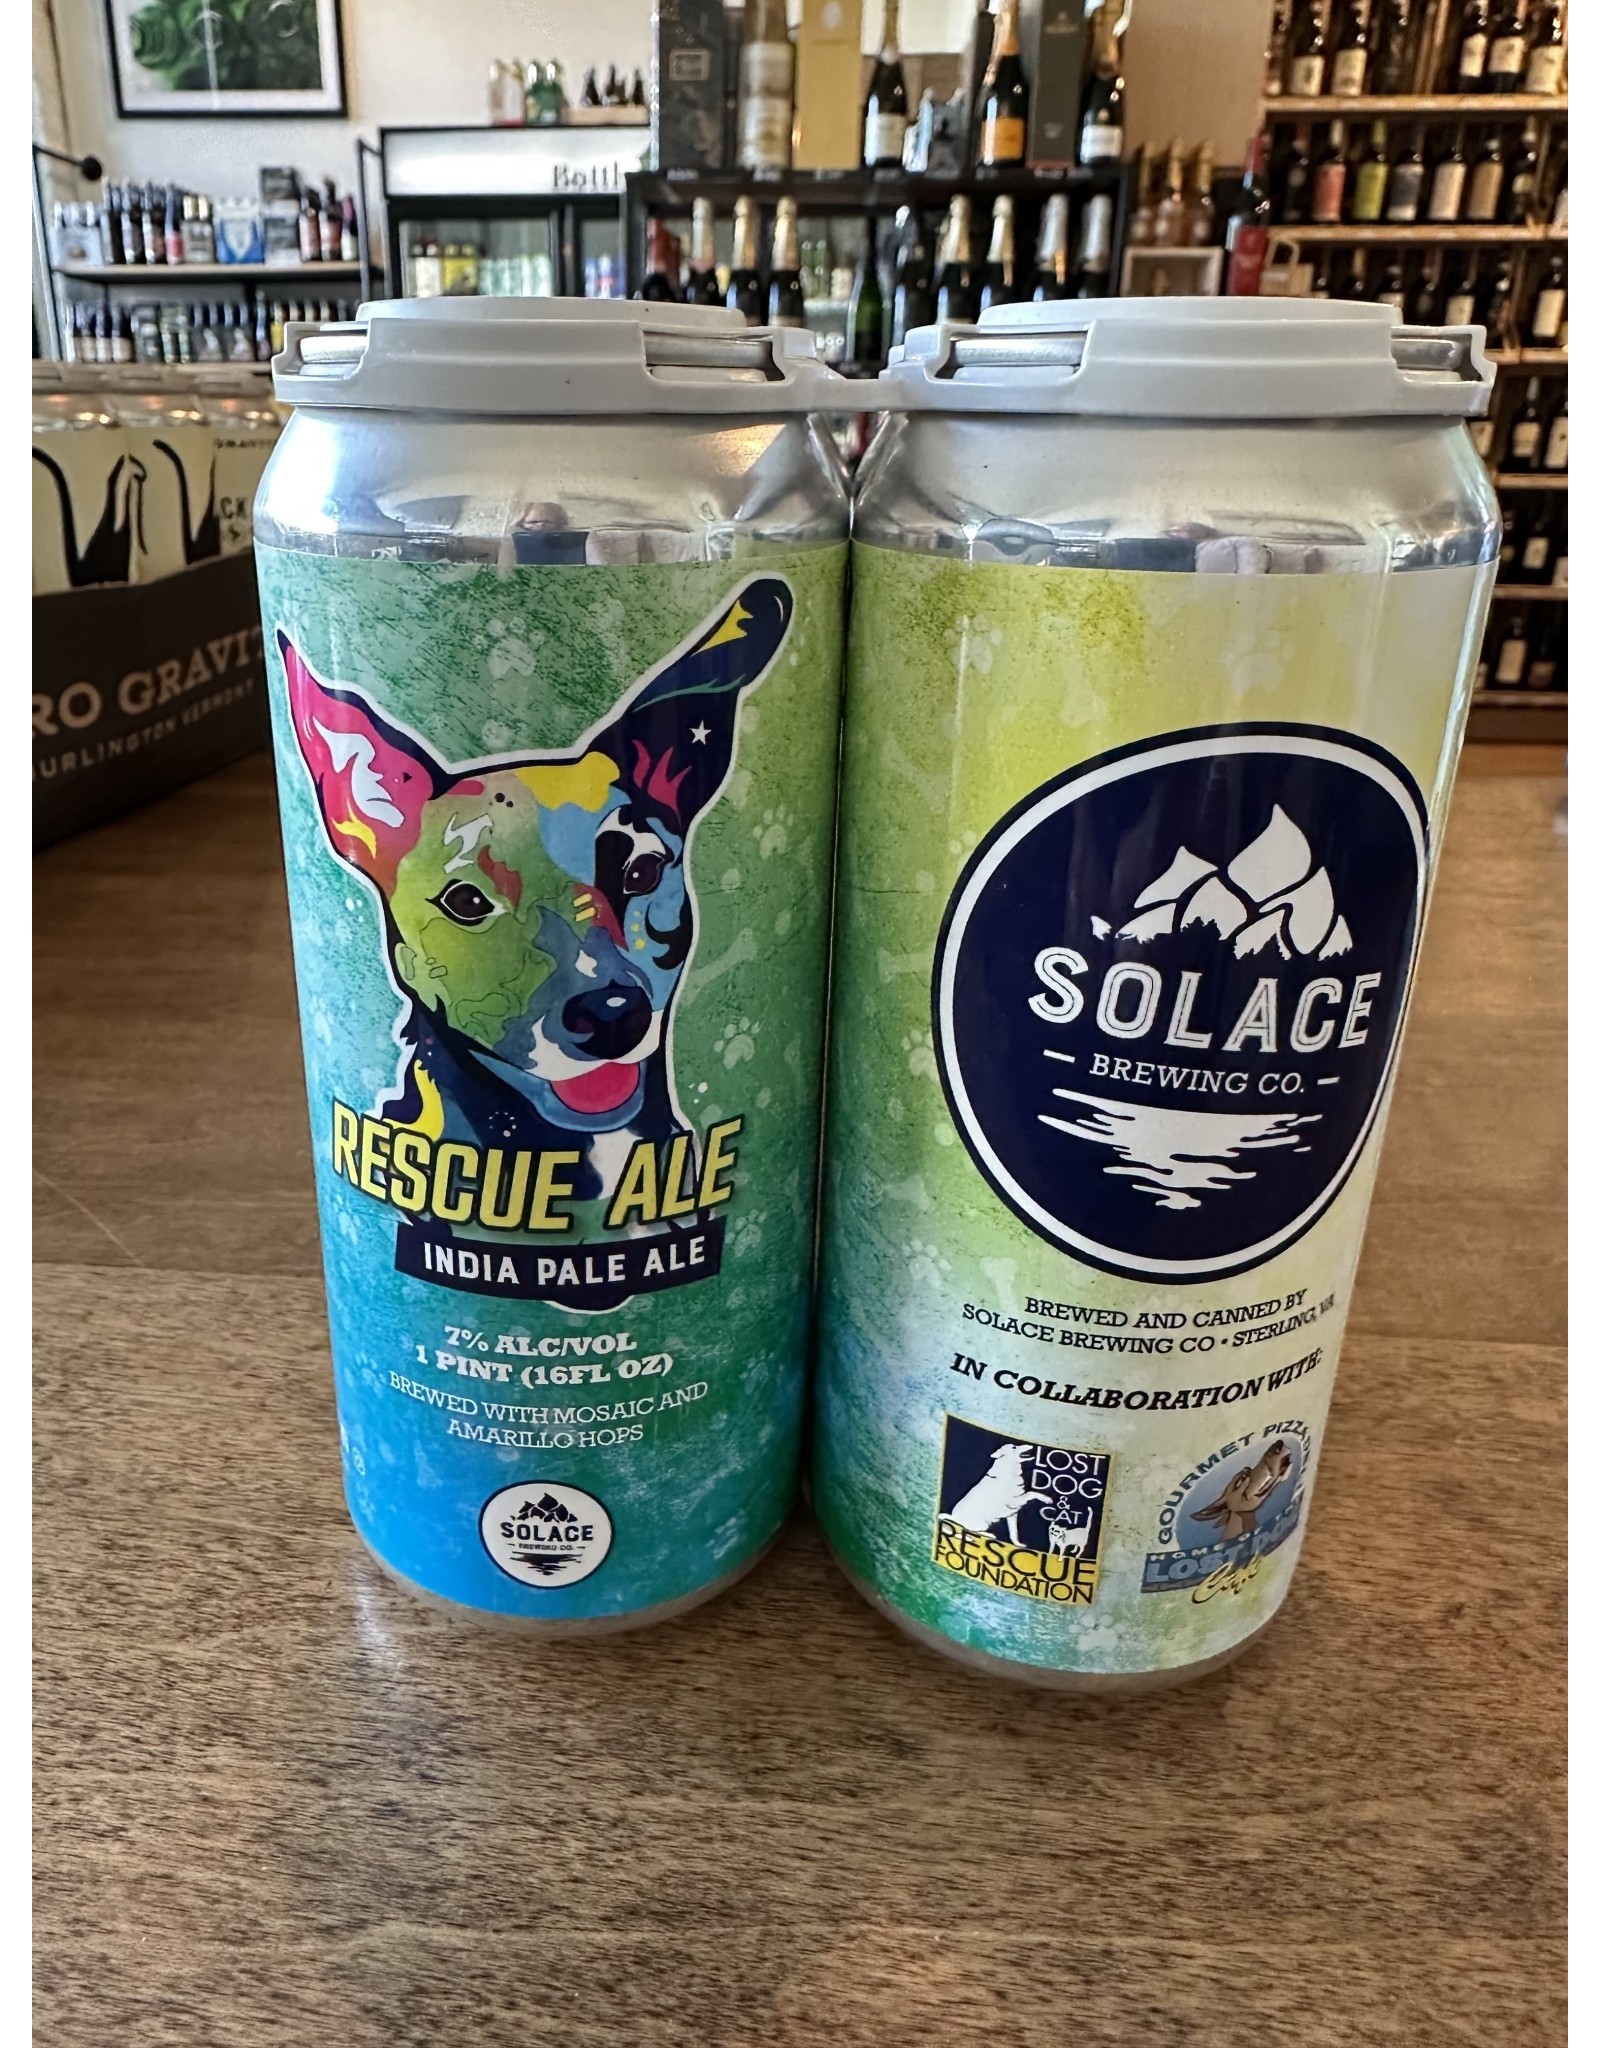 Solace Brewing Rescue Ale IPA